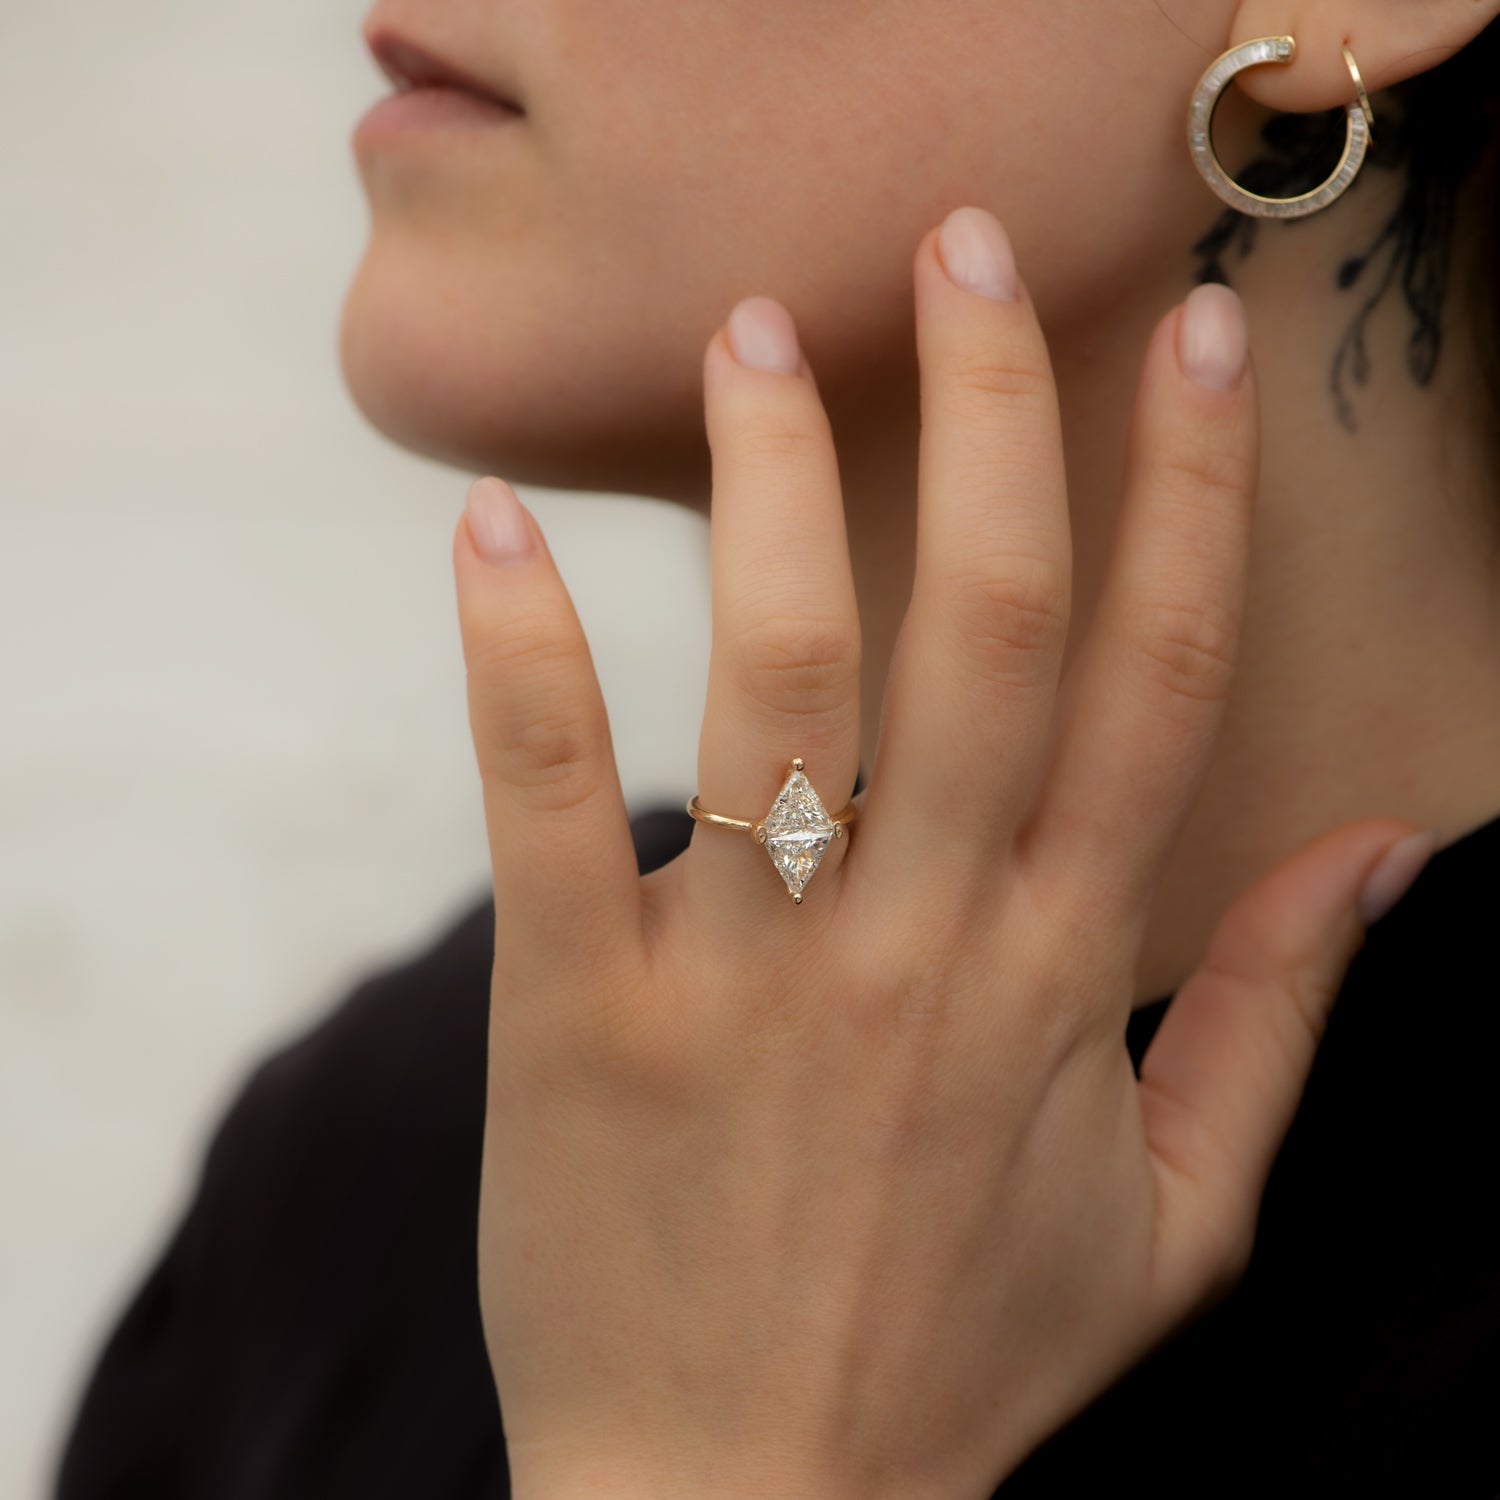 Buy Triangle Shape Ring Online In India - Etsy India